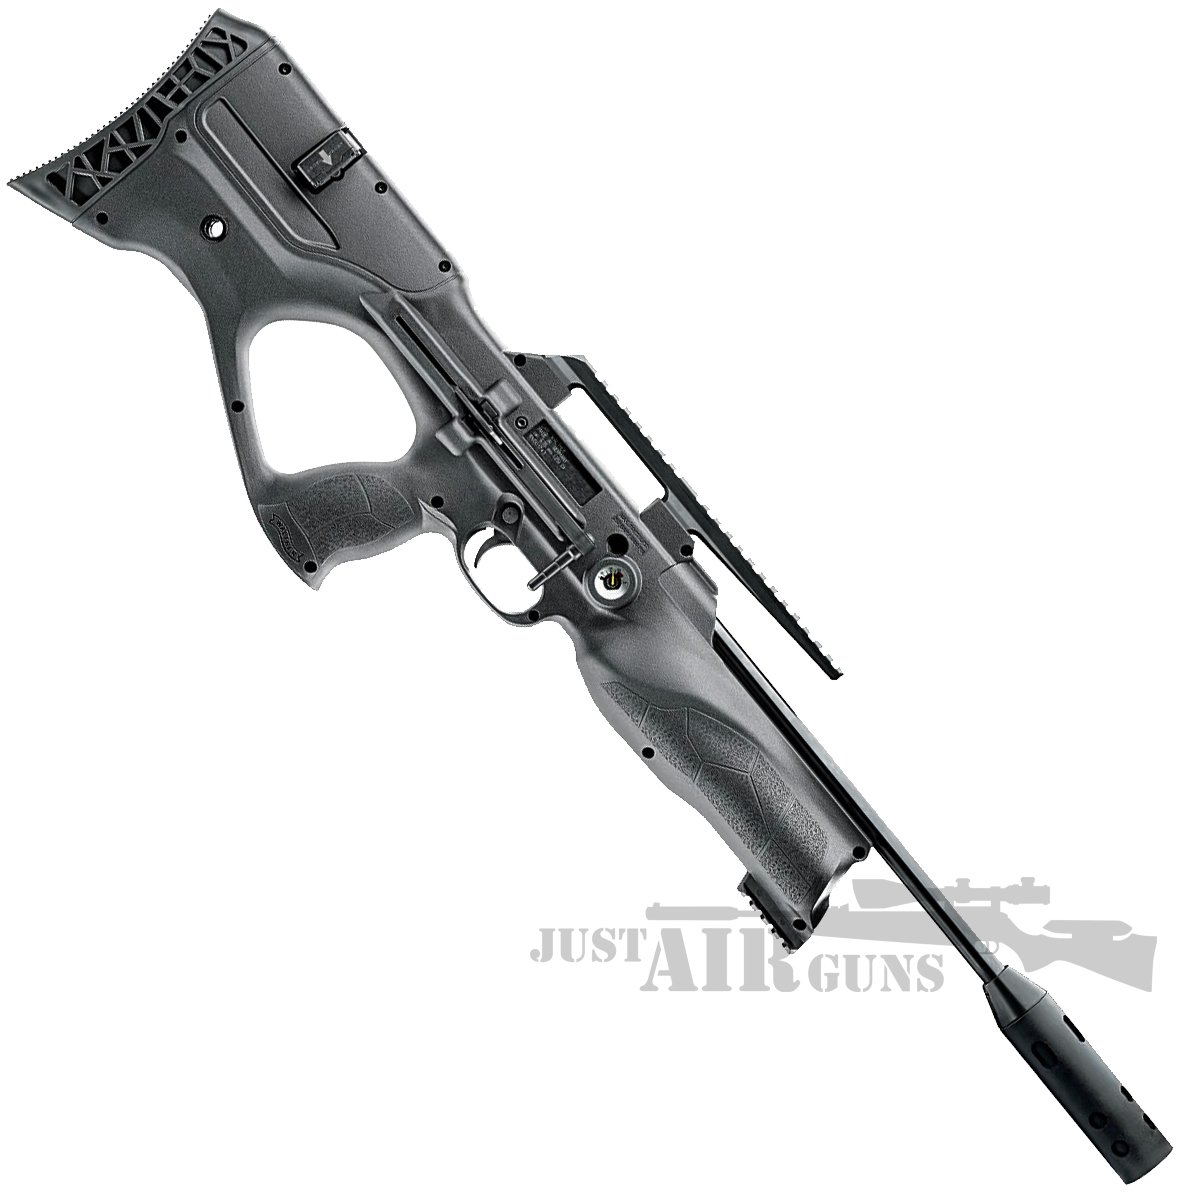 Walther Reign UXT .22 cal PCP Bullpup Air Rifle